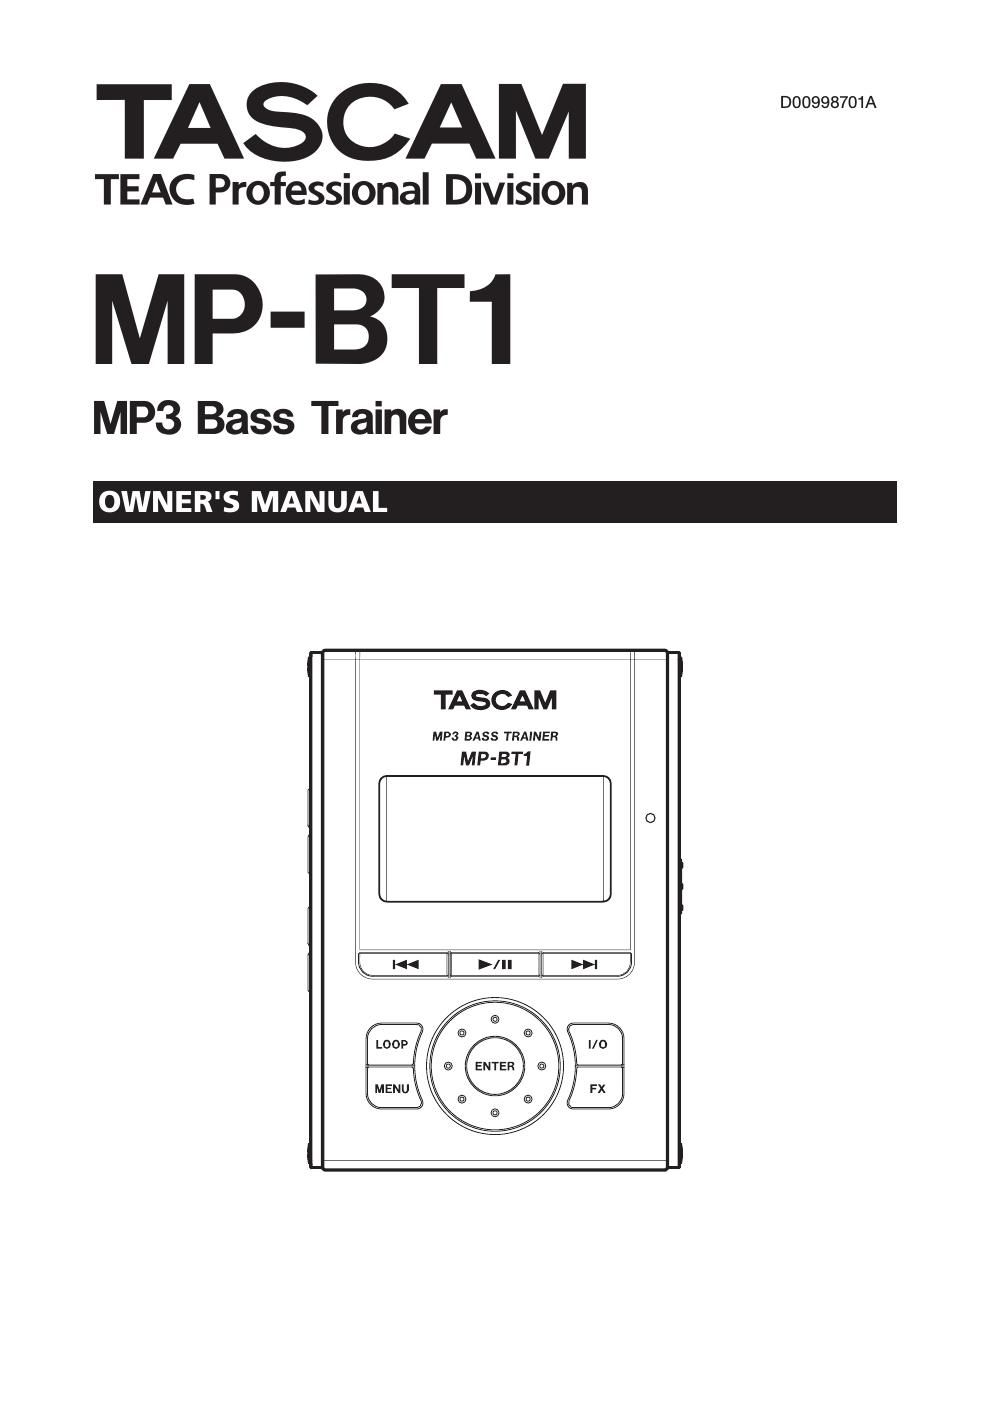 Tascam MP BT1 Owners Manual